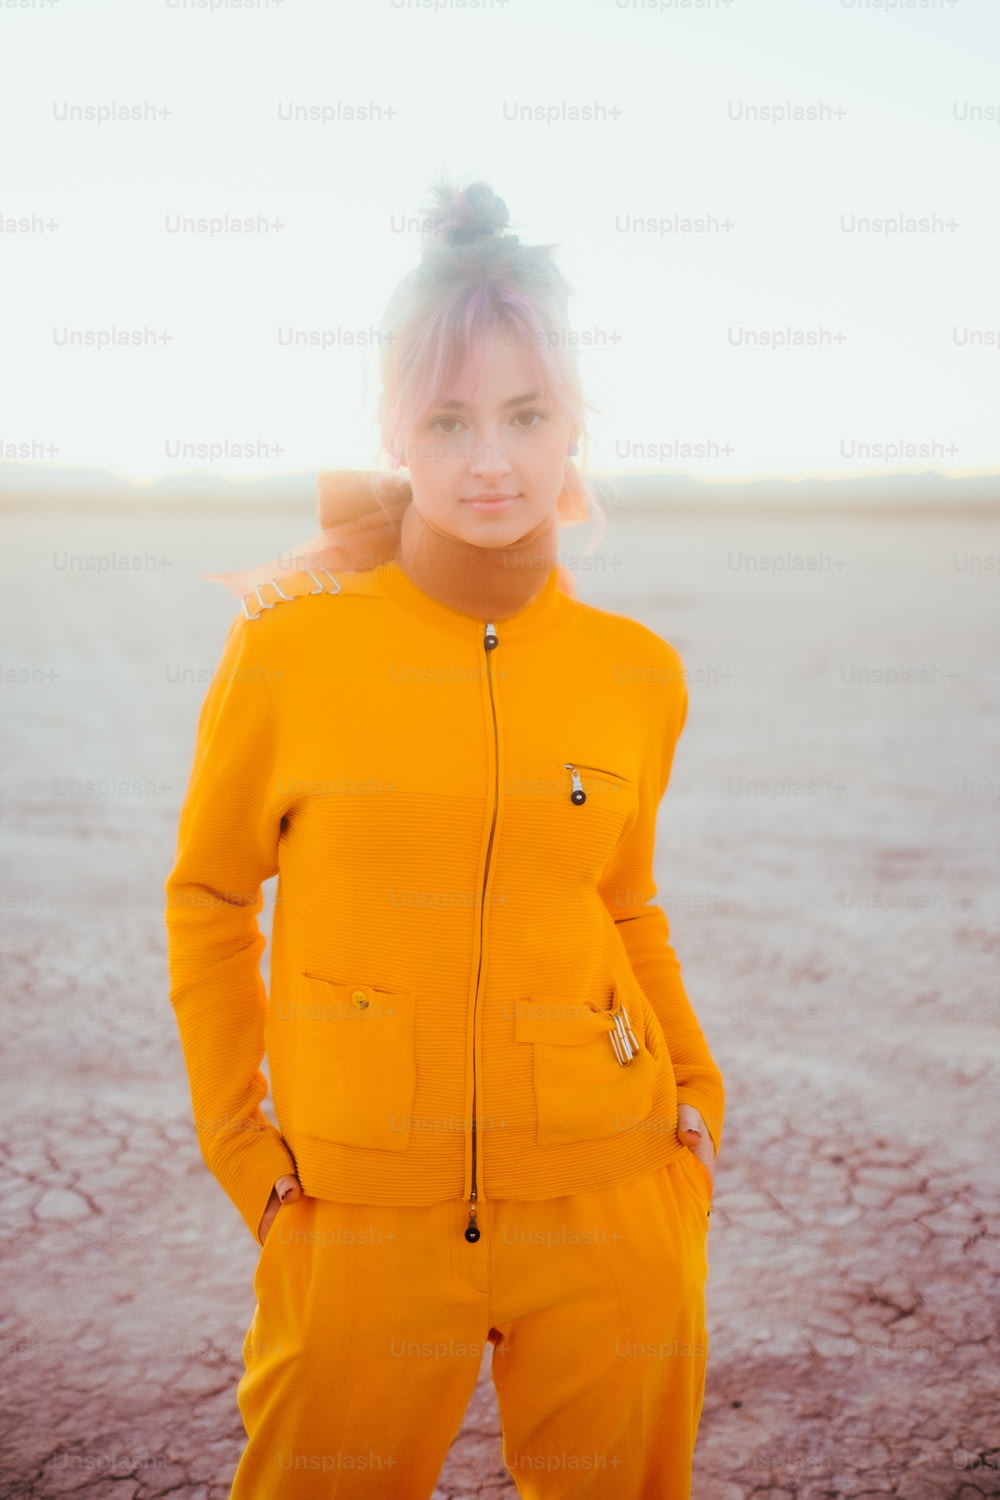 a woman in a yellow suit standing in a desert